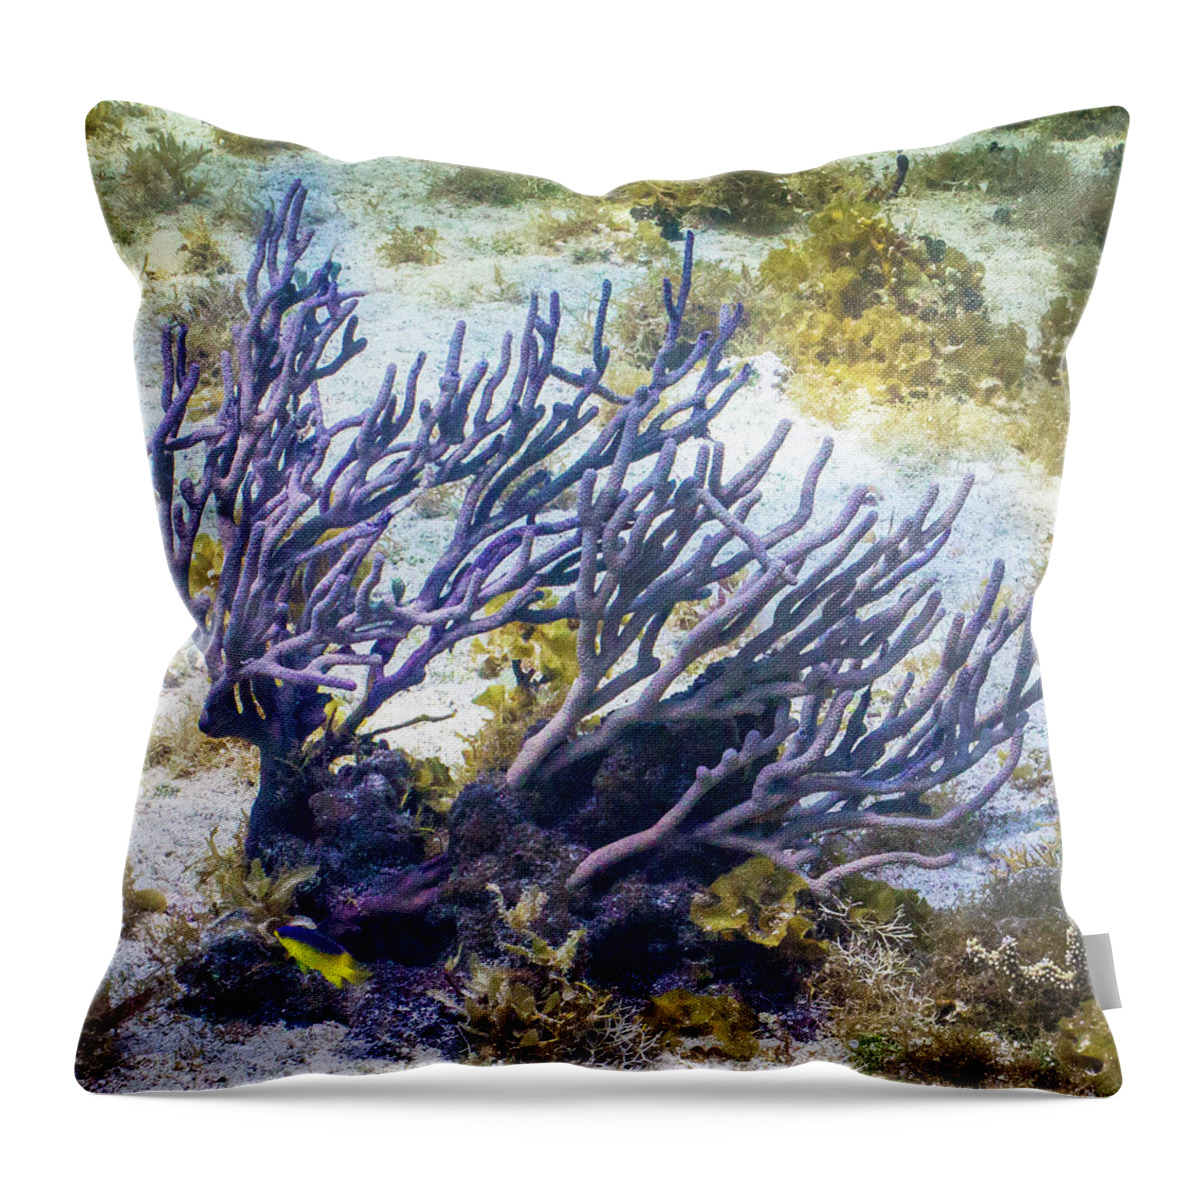 Fish Throw Pillow featuring the photograph Fairytail Land by Lynne Browne